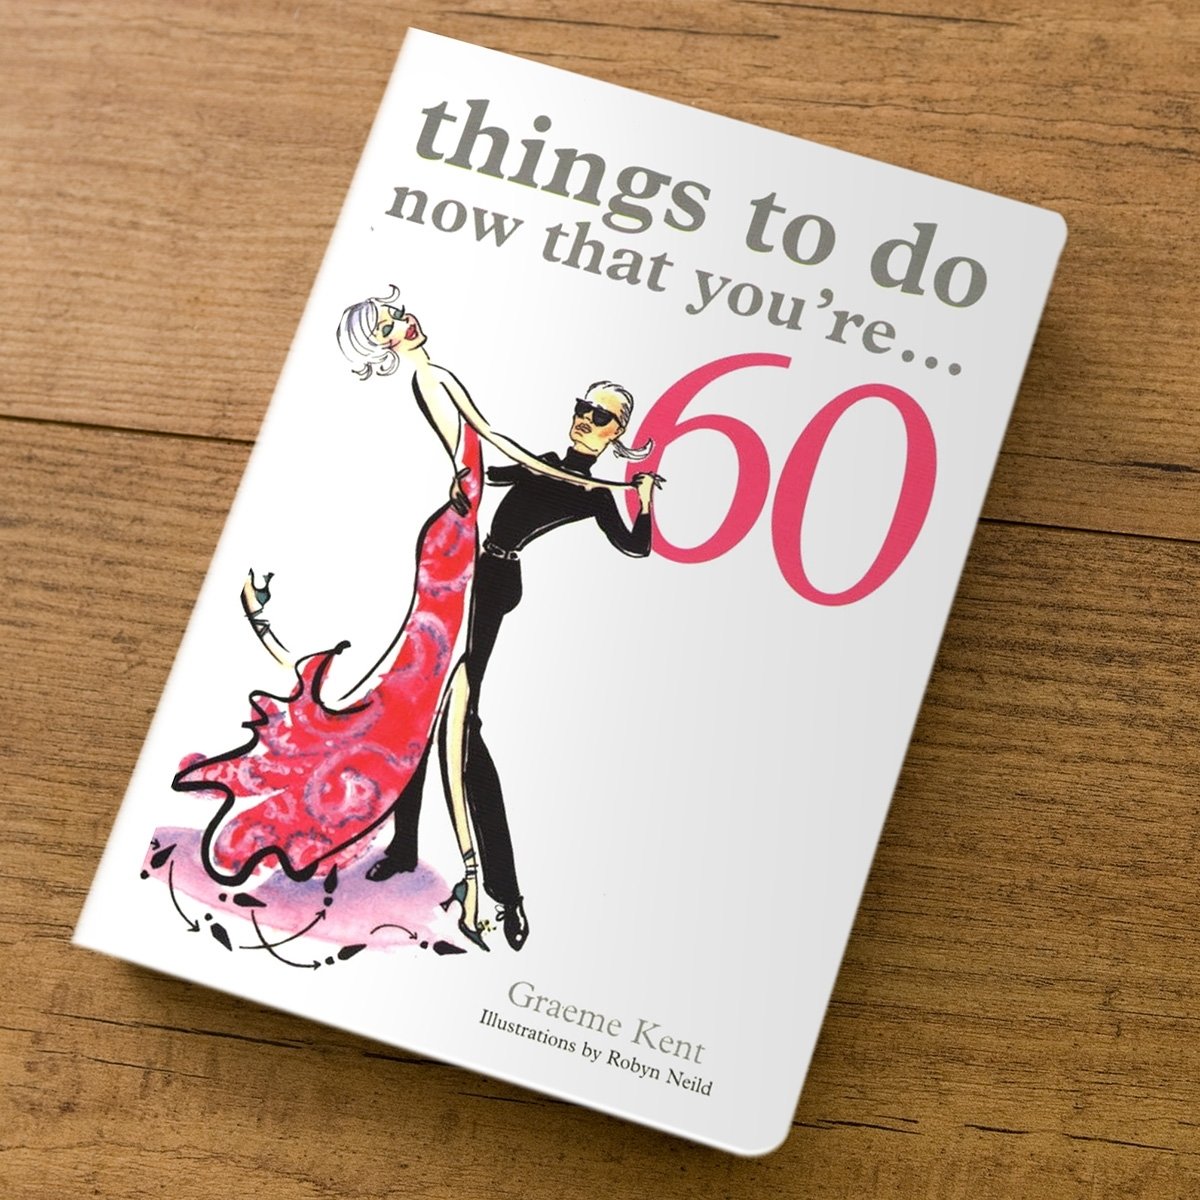 10 Stylish Gift Ideas For 60Th Birthday things to do now that youre 60 gift book 60th birthday gifts 2022